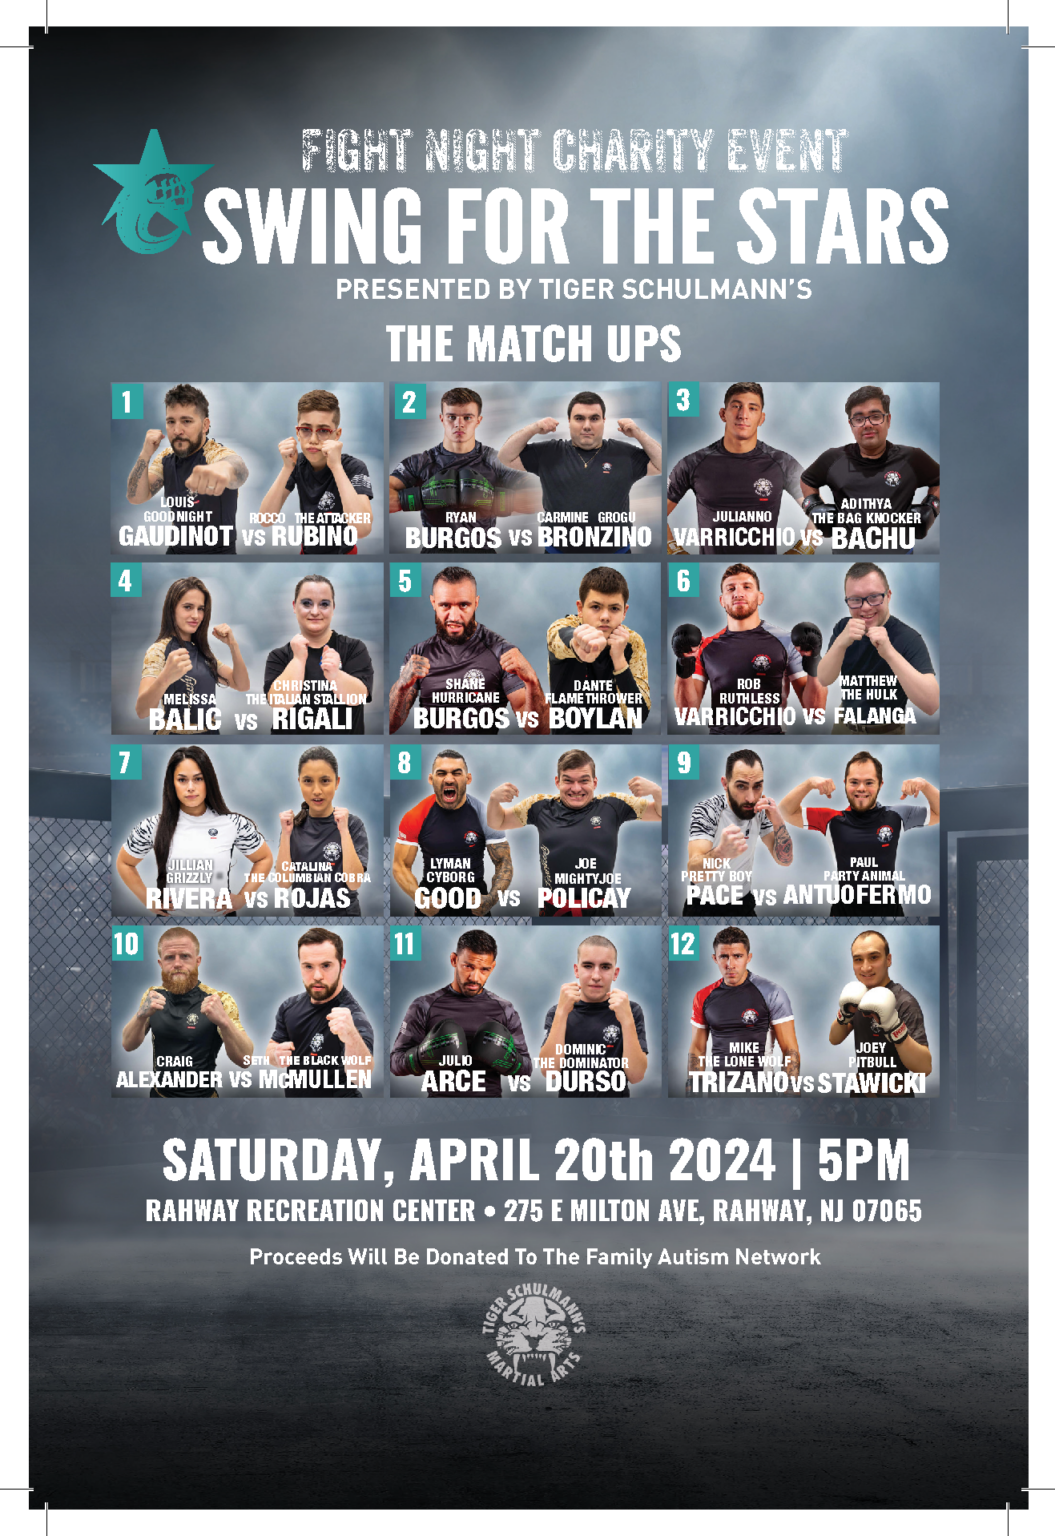 Swing for the stars match up poster, it has 24 contestants.